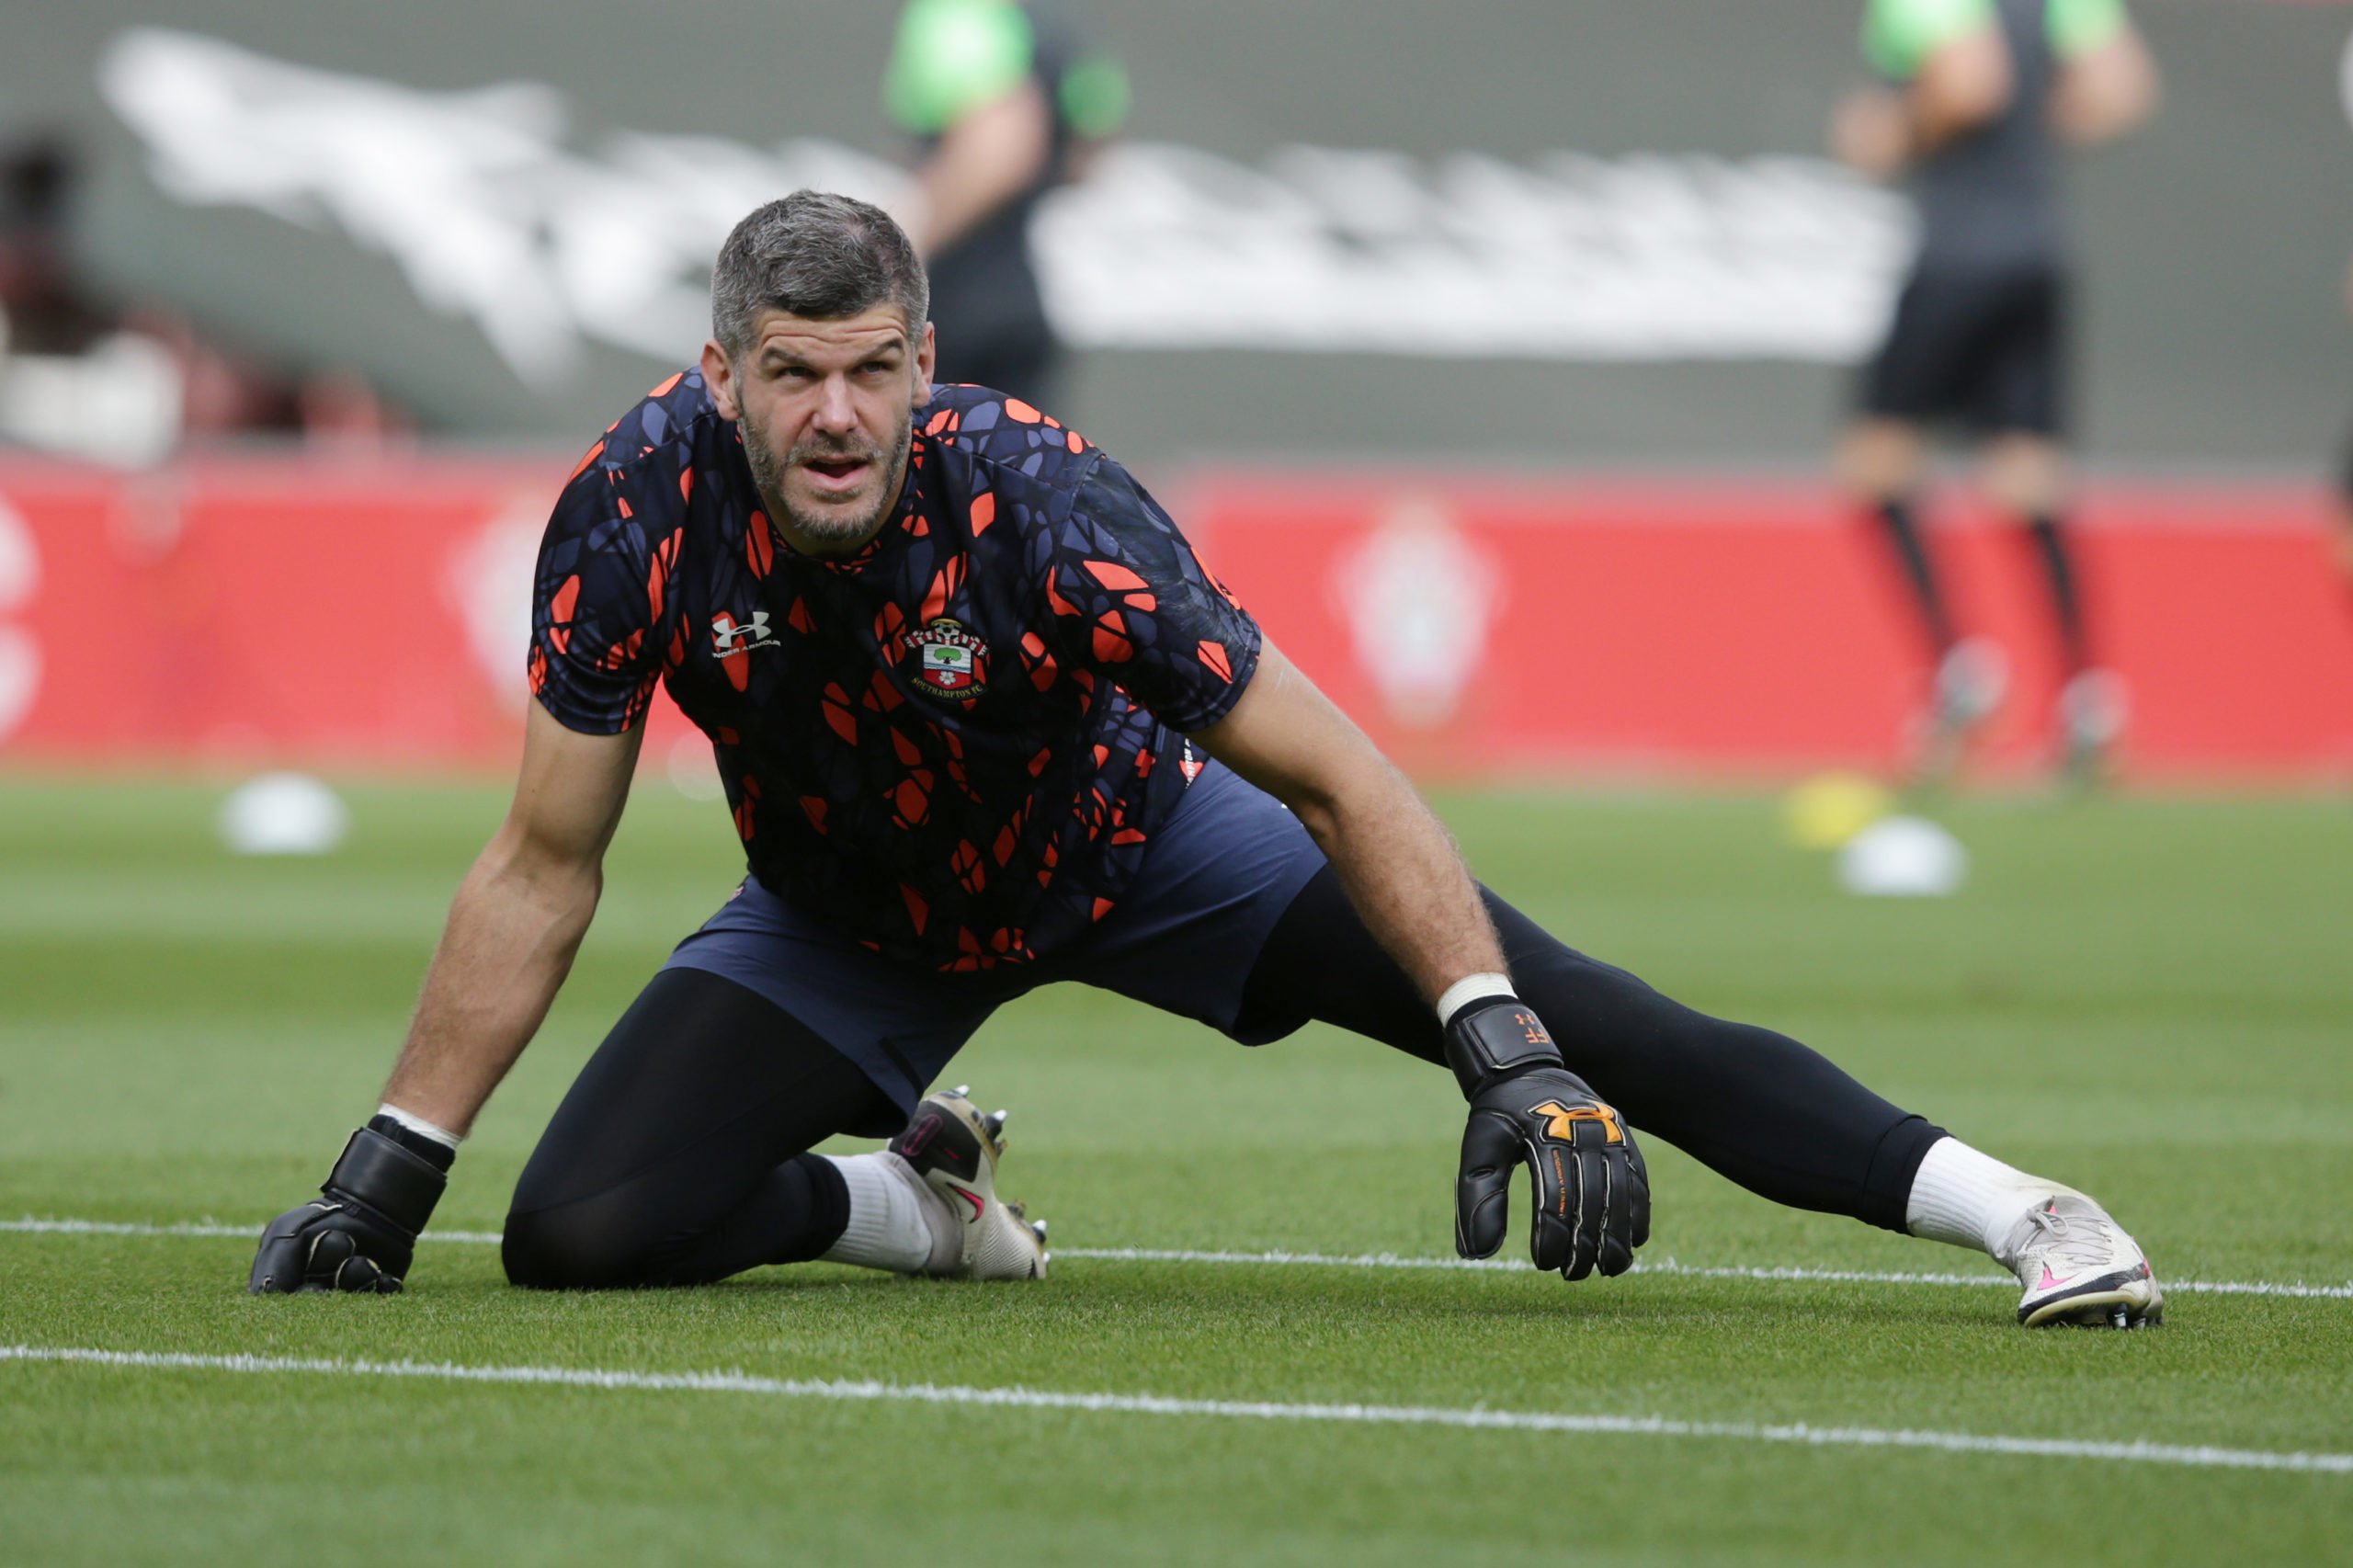 Celtic shouldn't go begging Fraser Forster to return; he had his chance and turned Hoops down